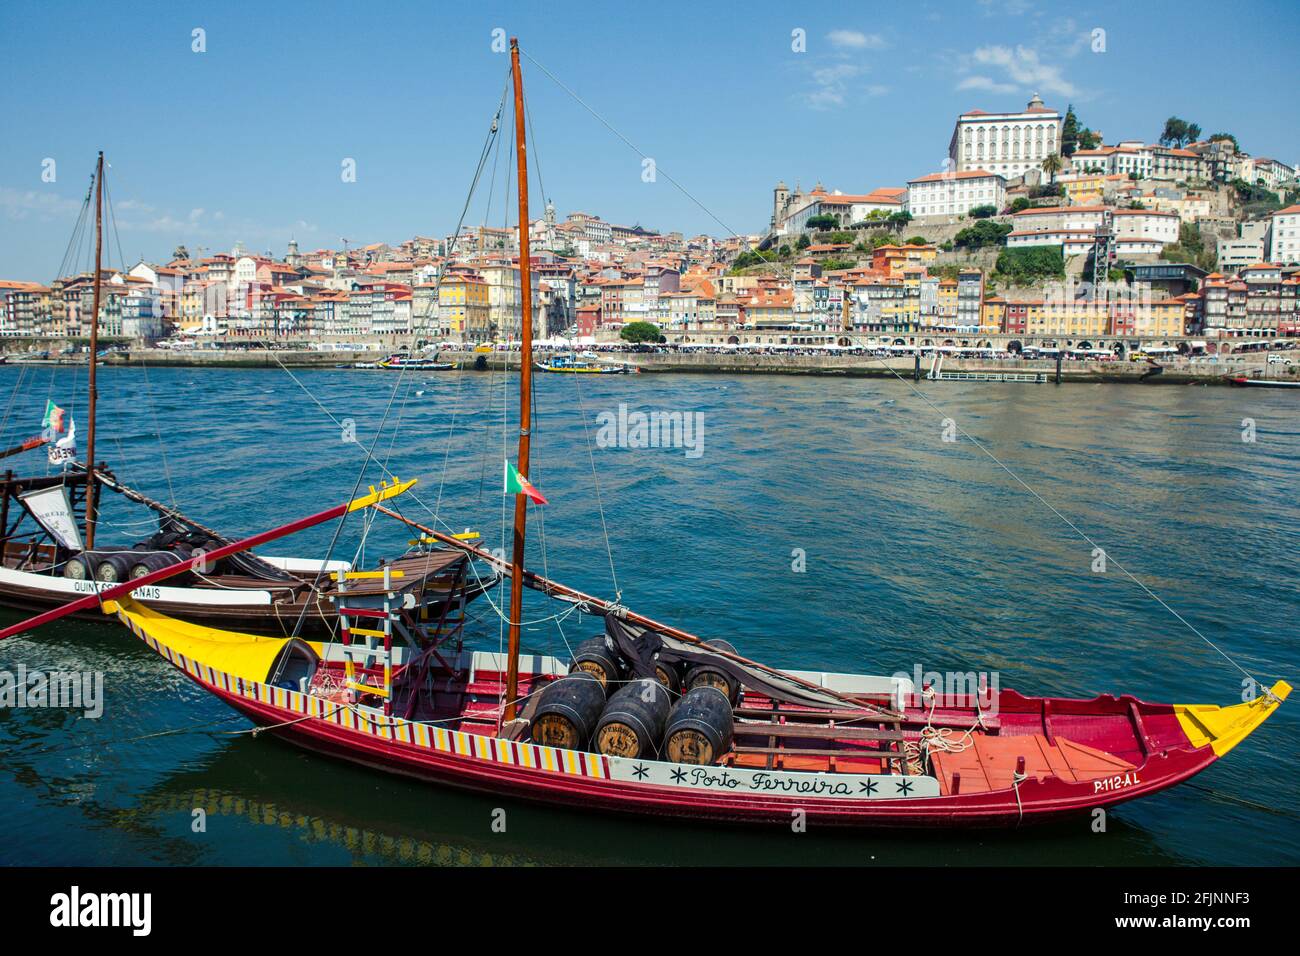 Barges on the Douro River in Porto, Portugal. Stock Photo